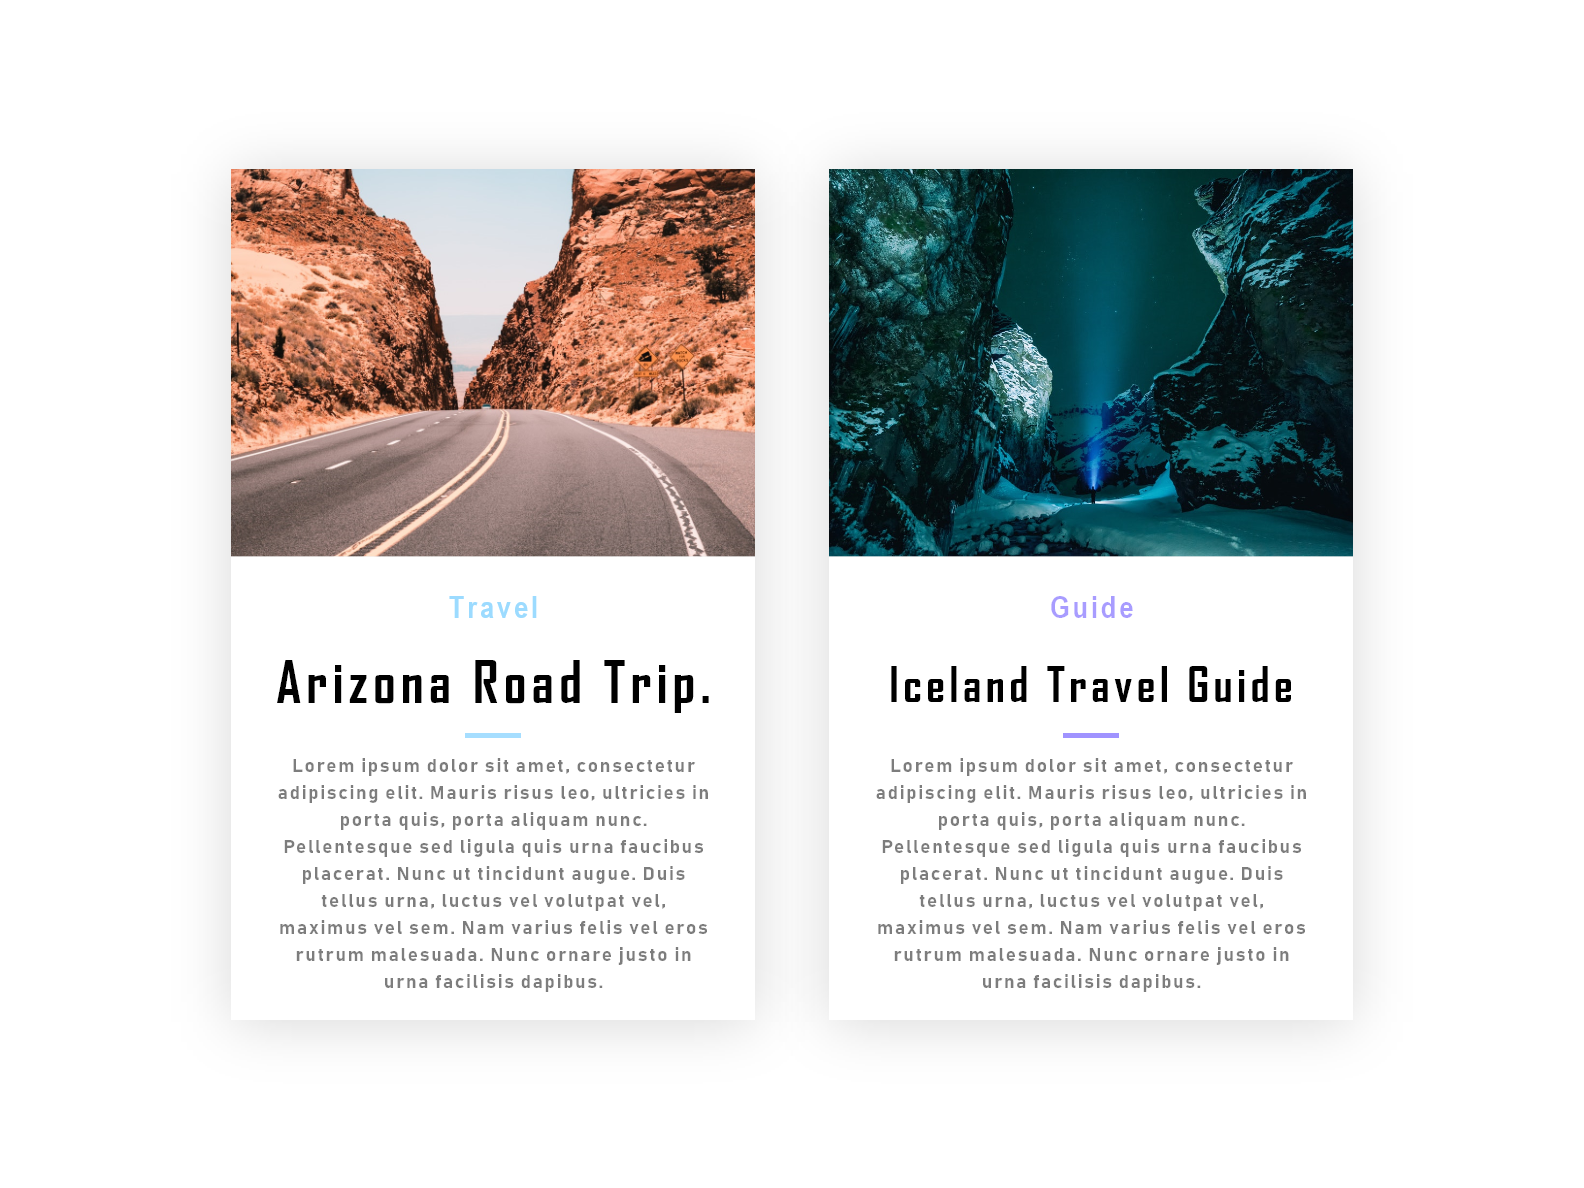 Blog post card design. by Mehmet can on Dribbble